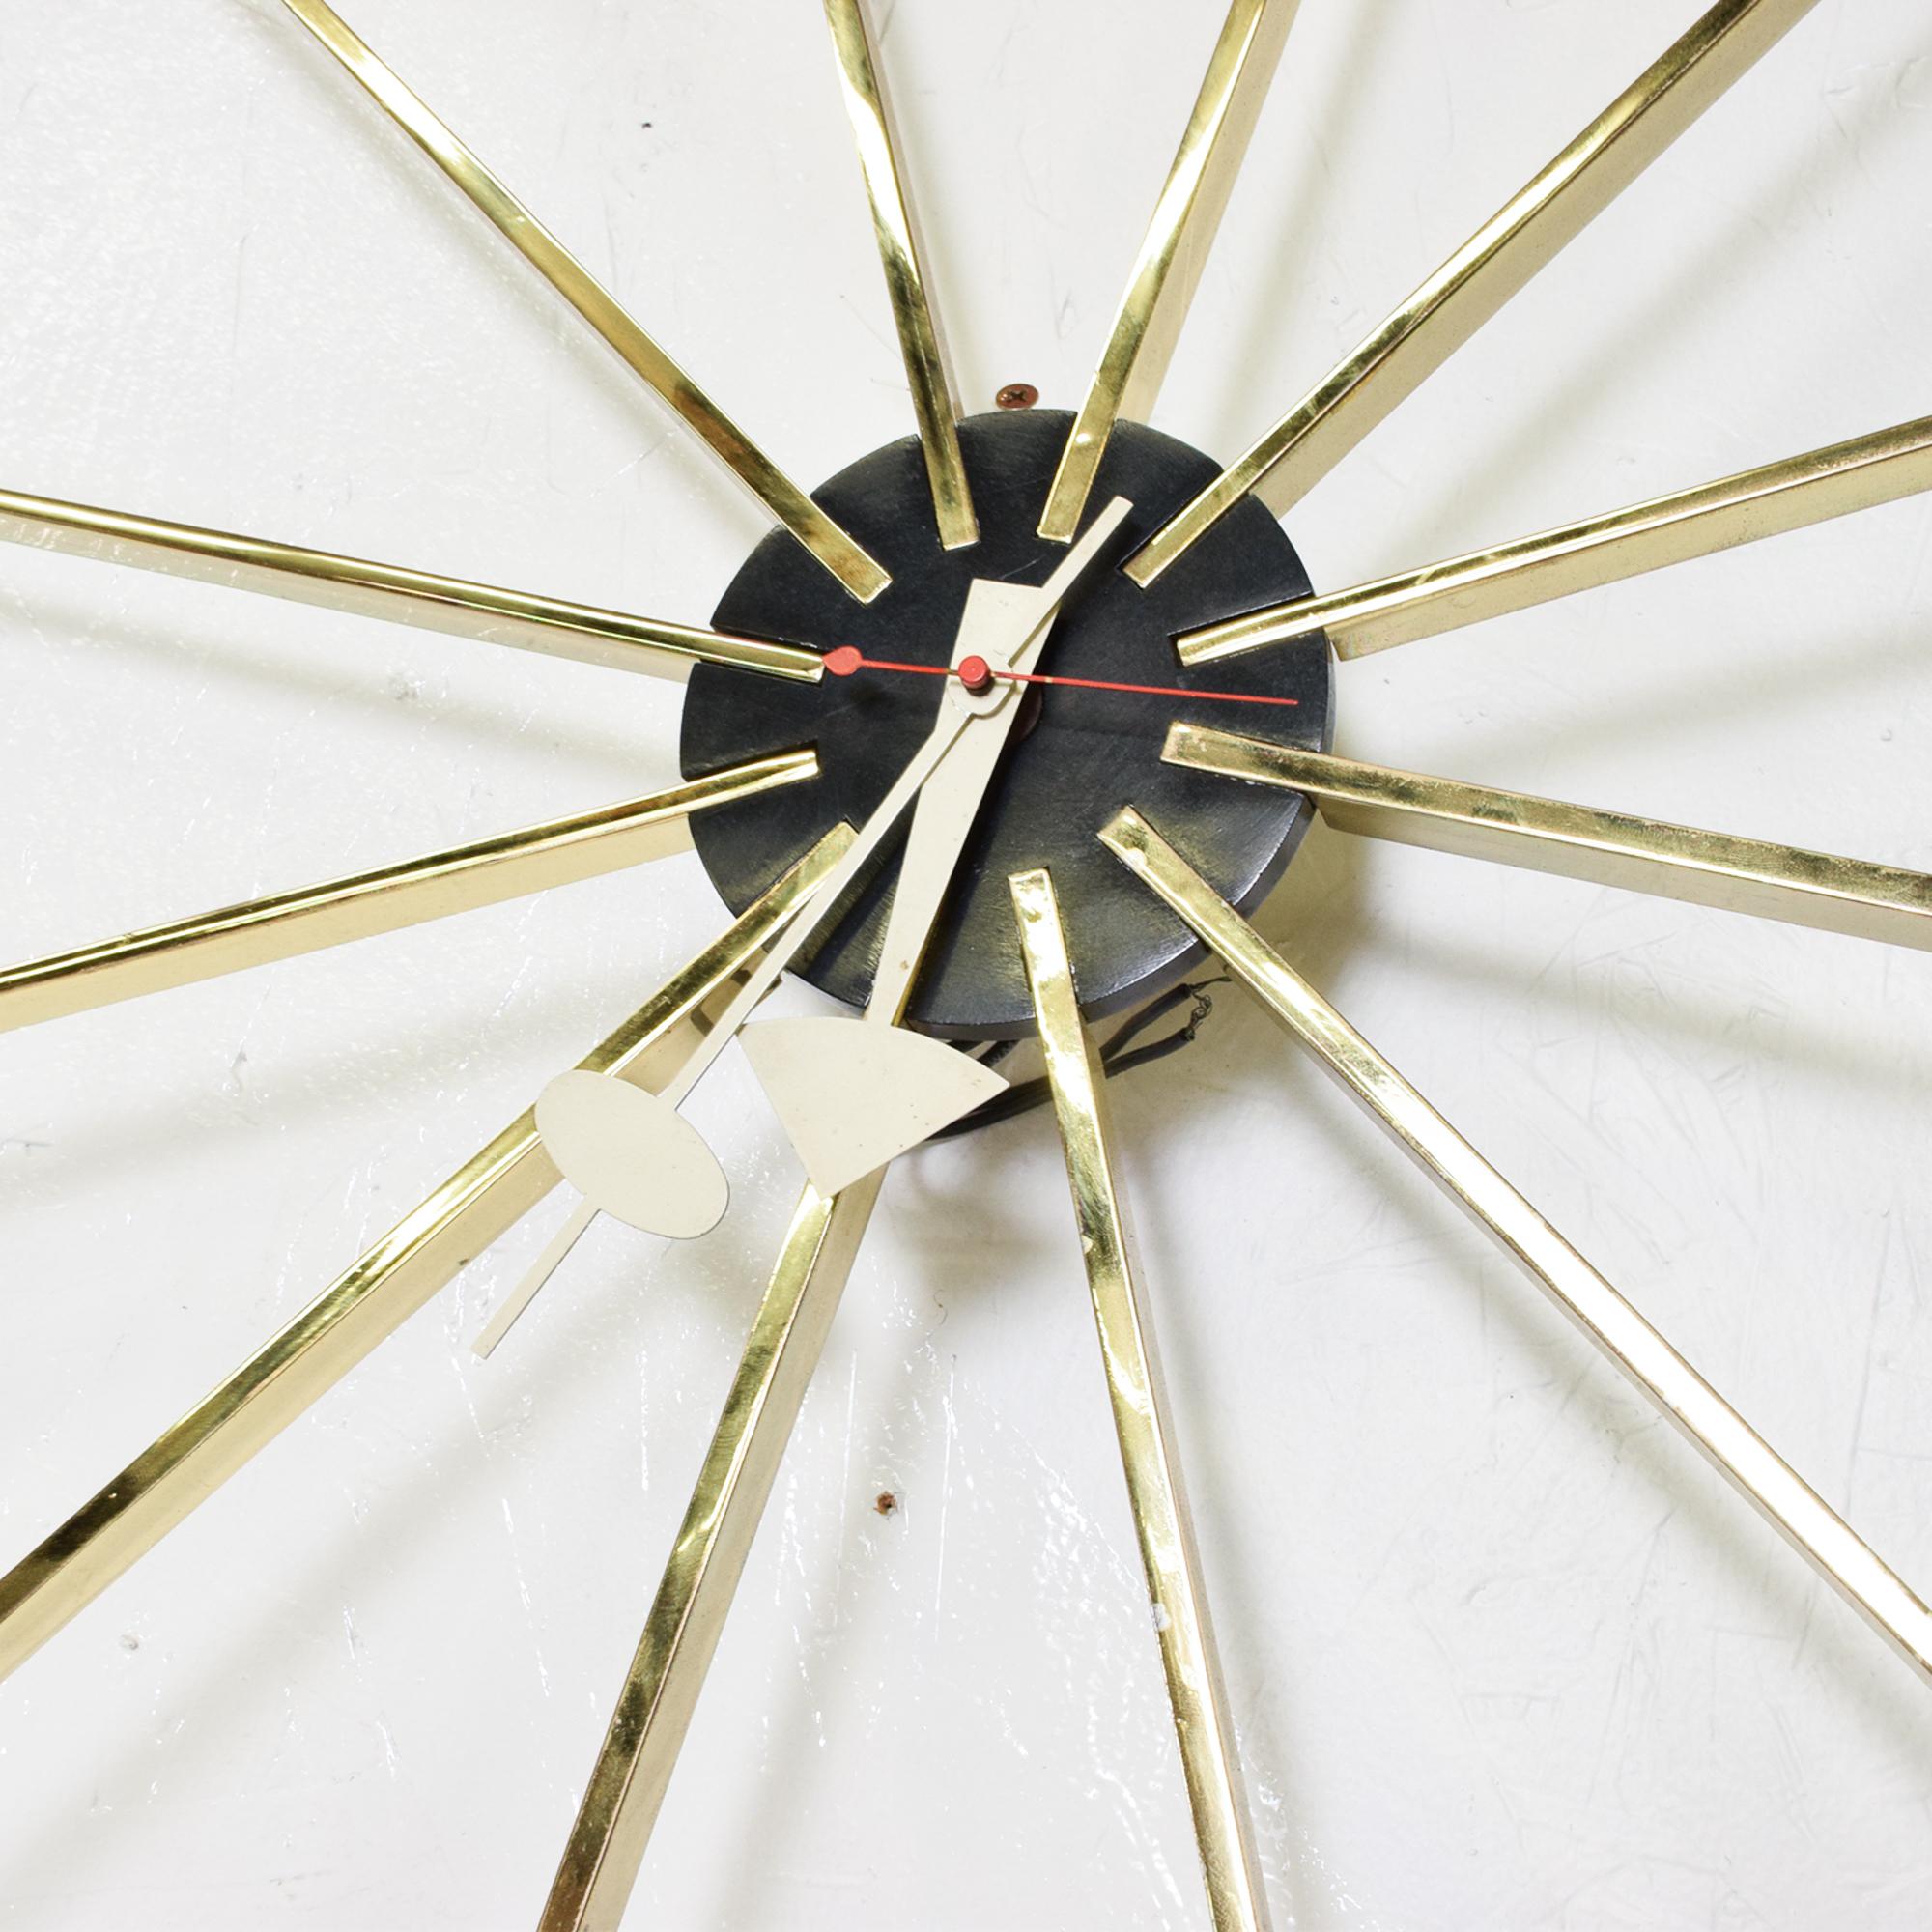 Vintage Mid-Century Modern brass wall clock by George Nelson for Howard Miller.
Brass spike starburst sunburst design modern exaggerated original arms
The USA, circa 1960s.
Dimensions: 24 in diameter x 2 inches depth.
Vintage condition